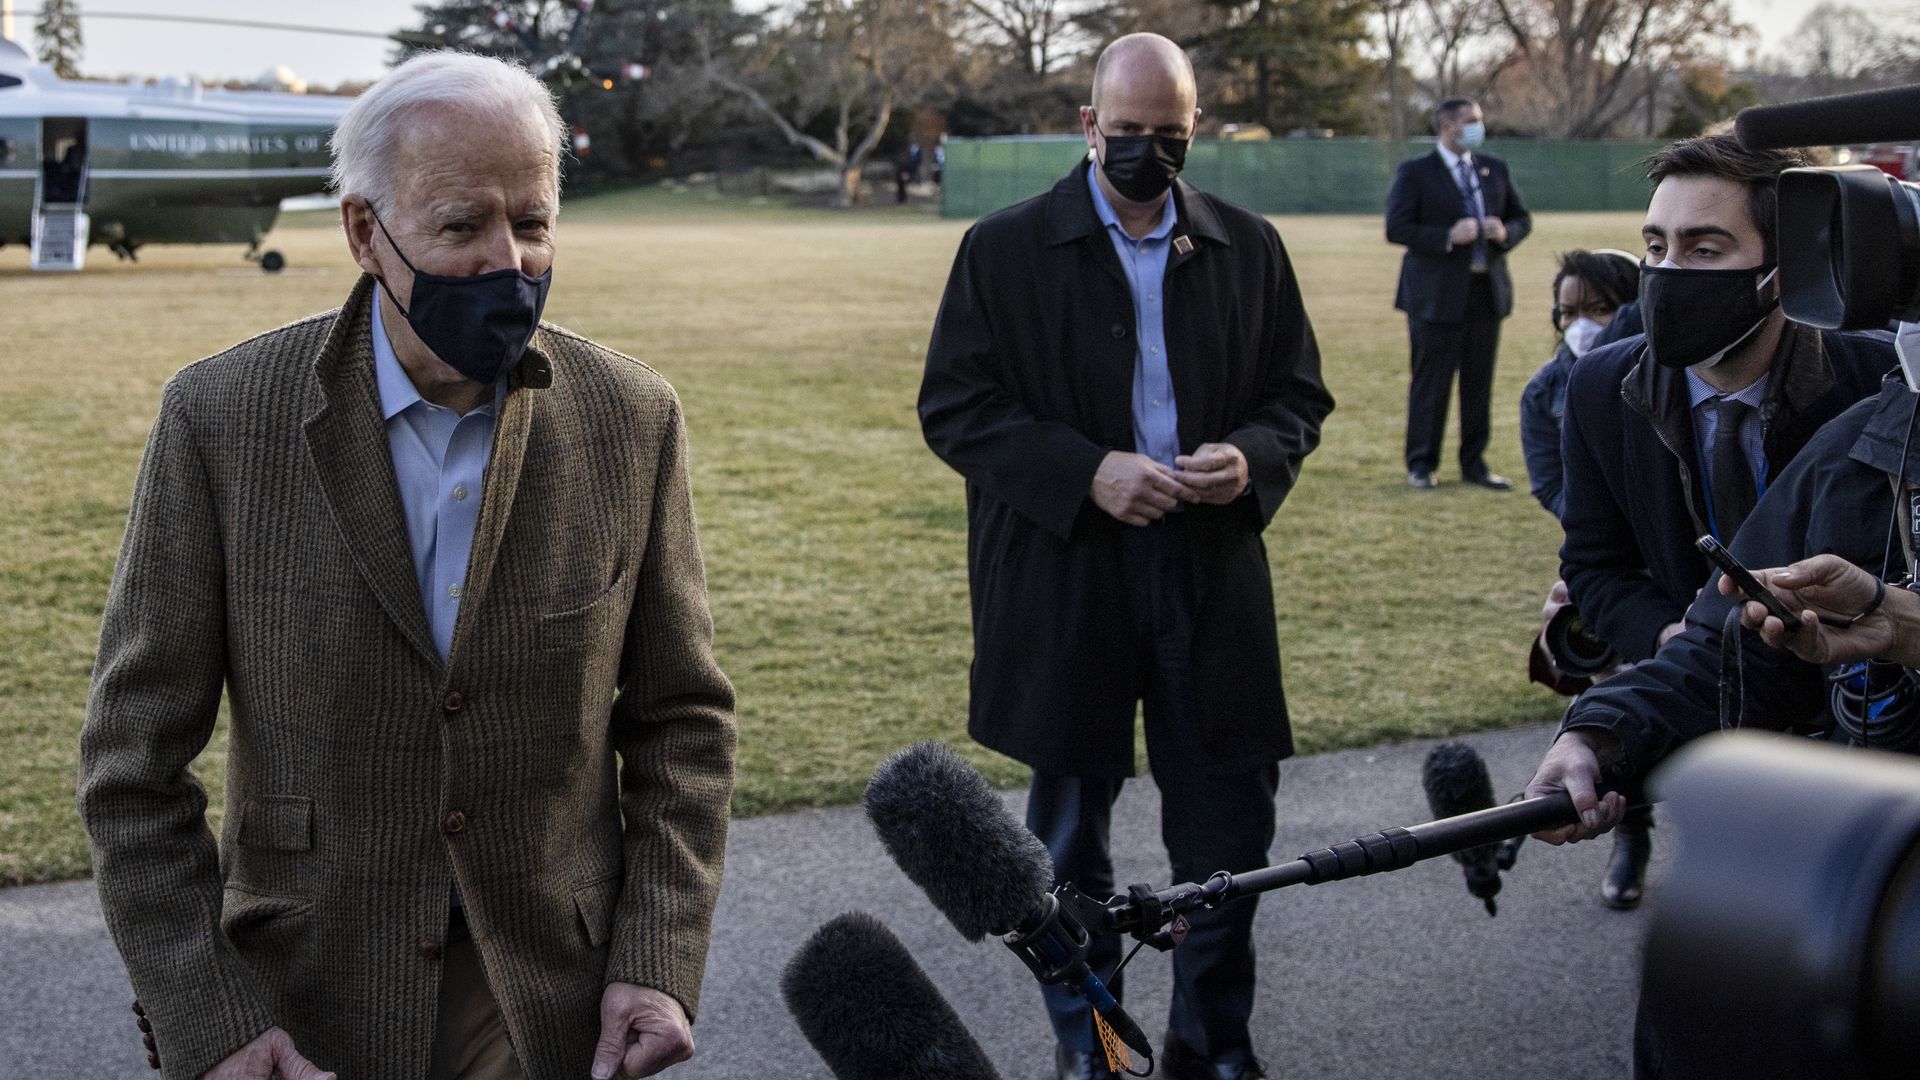  President Joe Biden stops to talk to the media after stepping off Marine One on the South Lawn of the White House on March 14